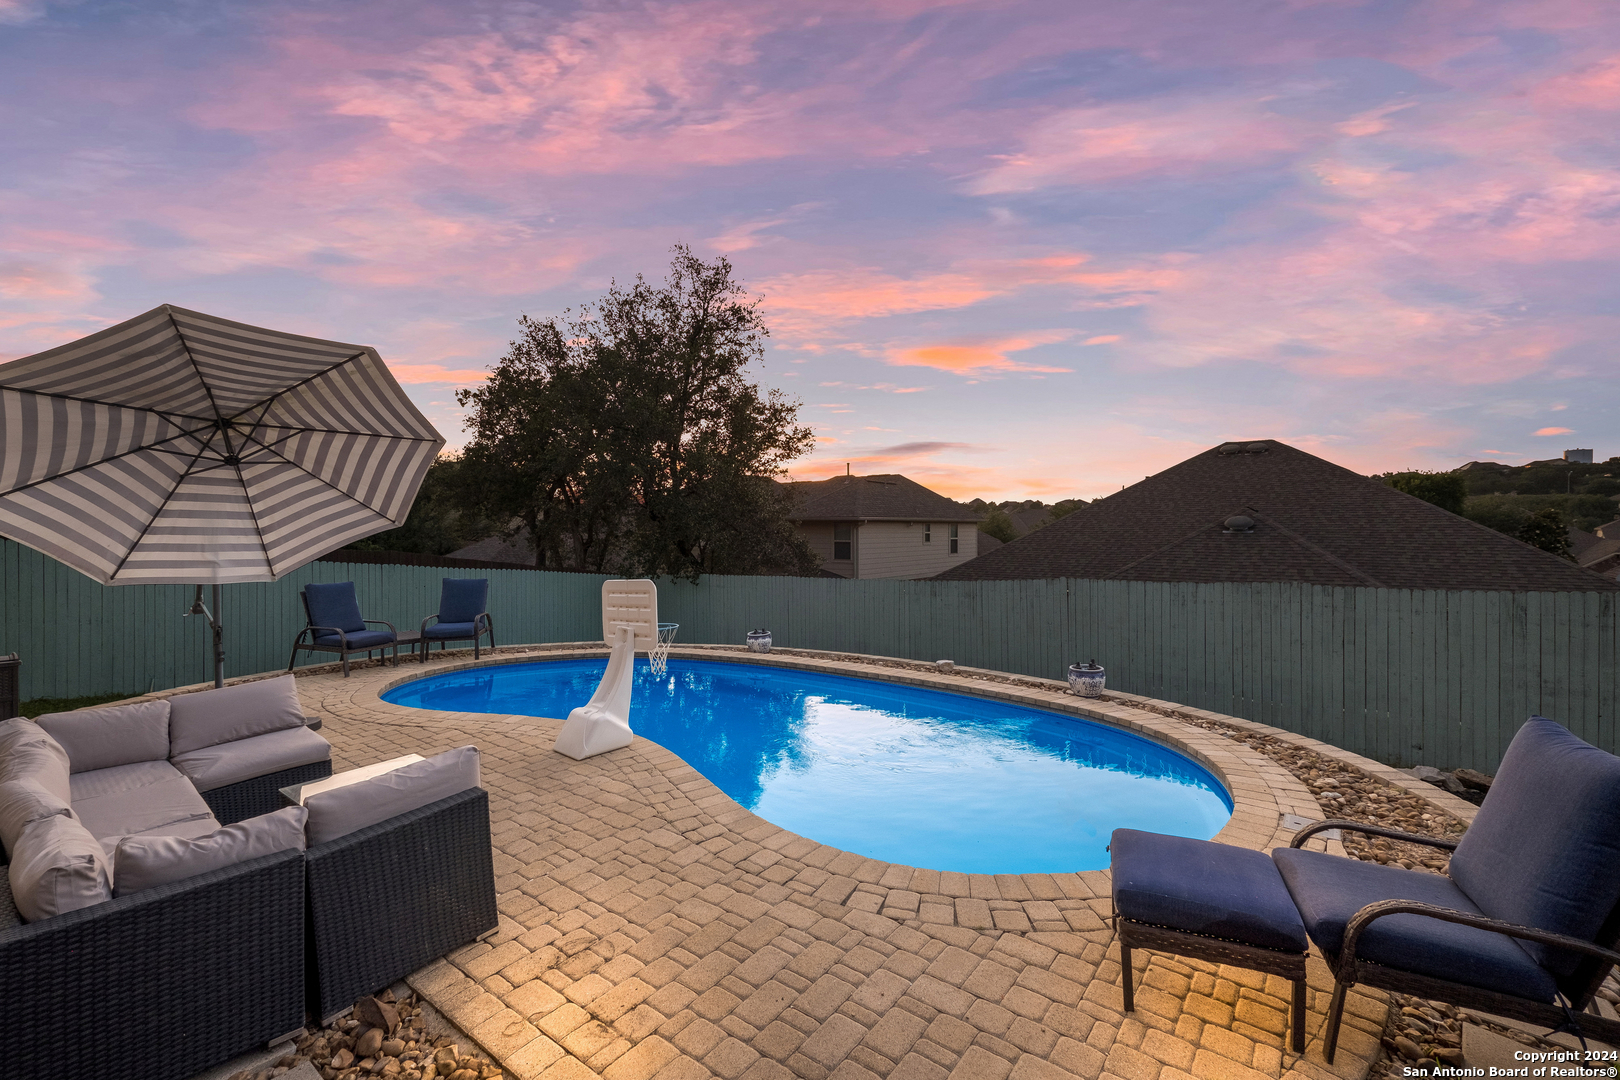 Photo of 25535 Wentink Ave in San Antonio, TX